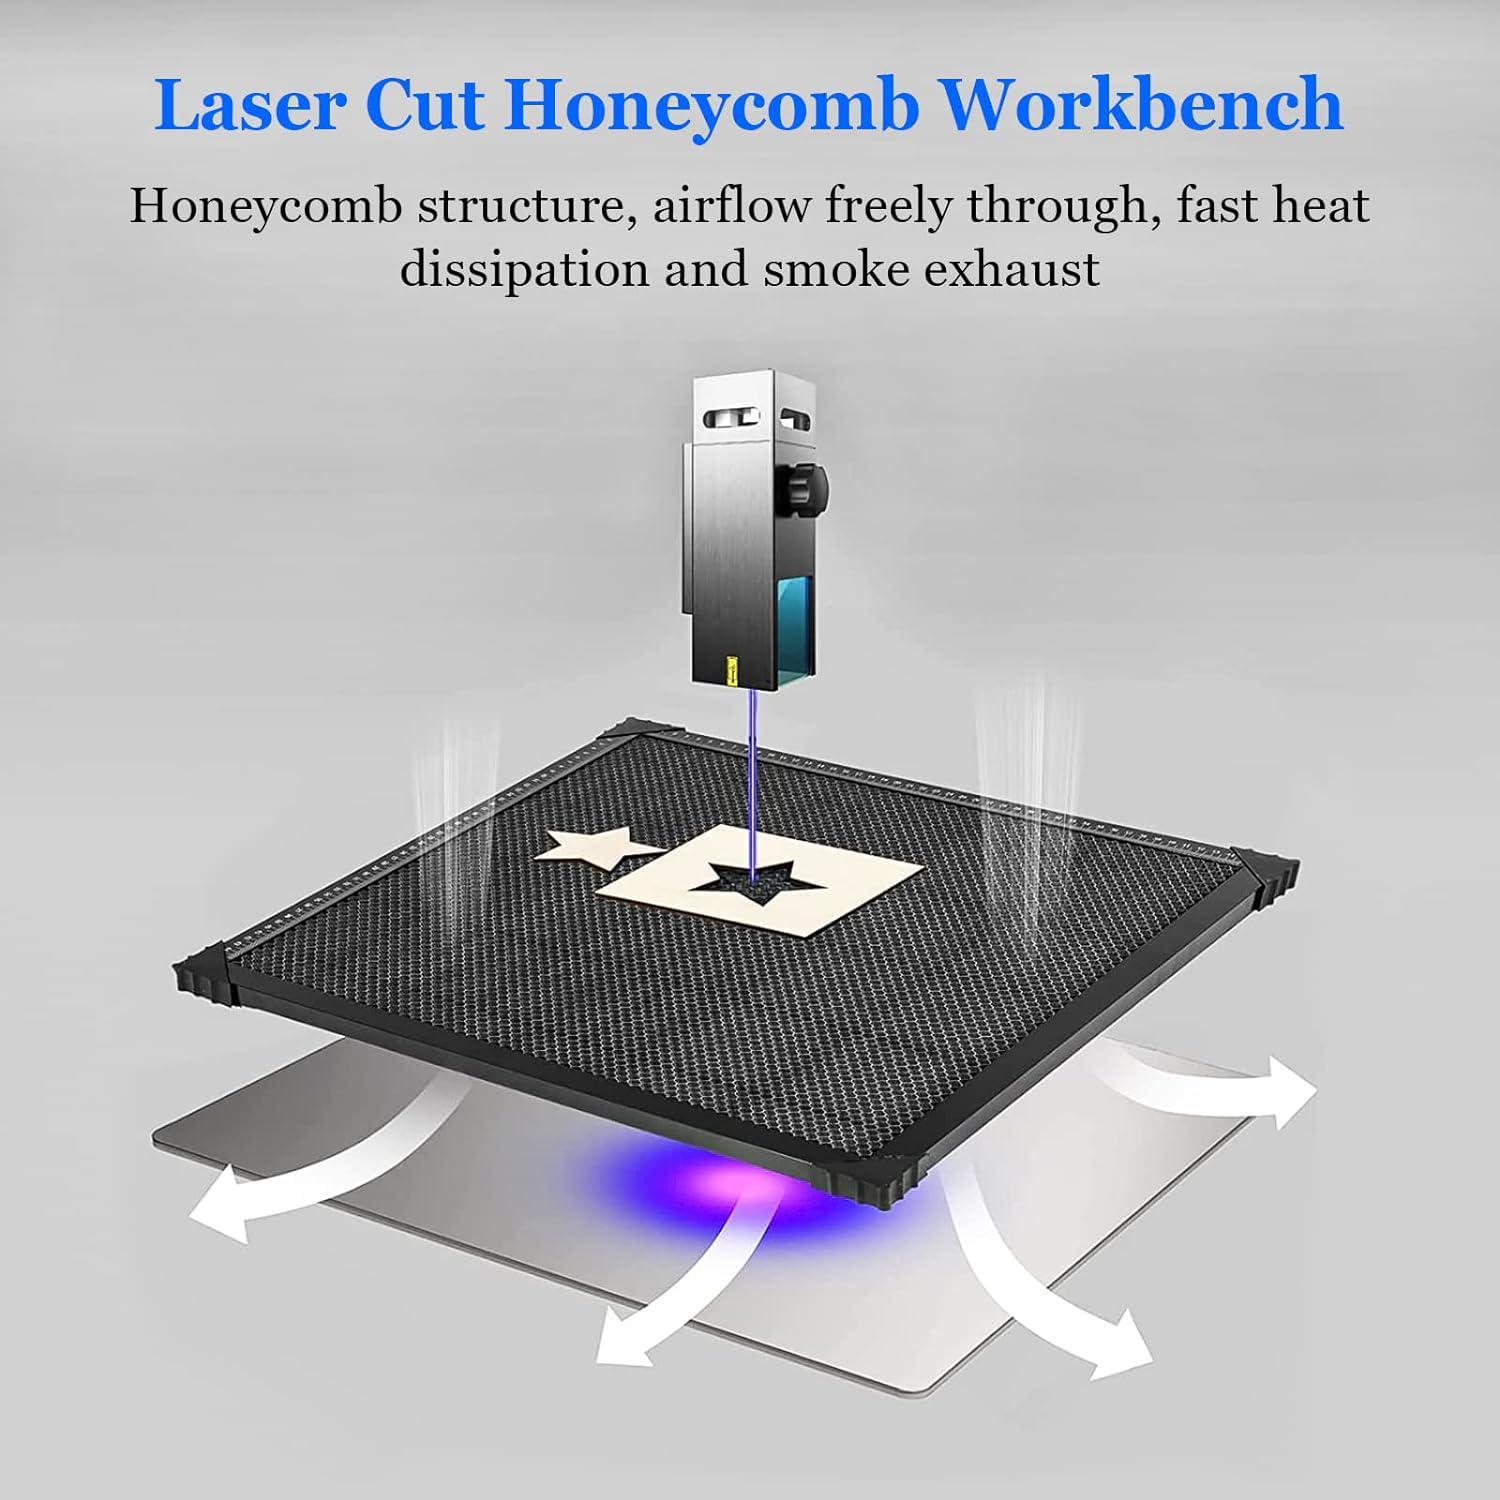 Honeycomb Laser Bed, 19.68x 19.68x 0.87 Honeycomb Working Table for  Laser Engraver Cutting Machine, Honeycomb Working Table for Fast Heat